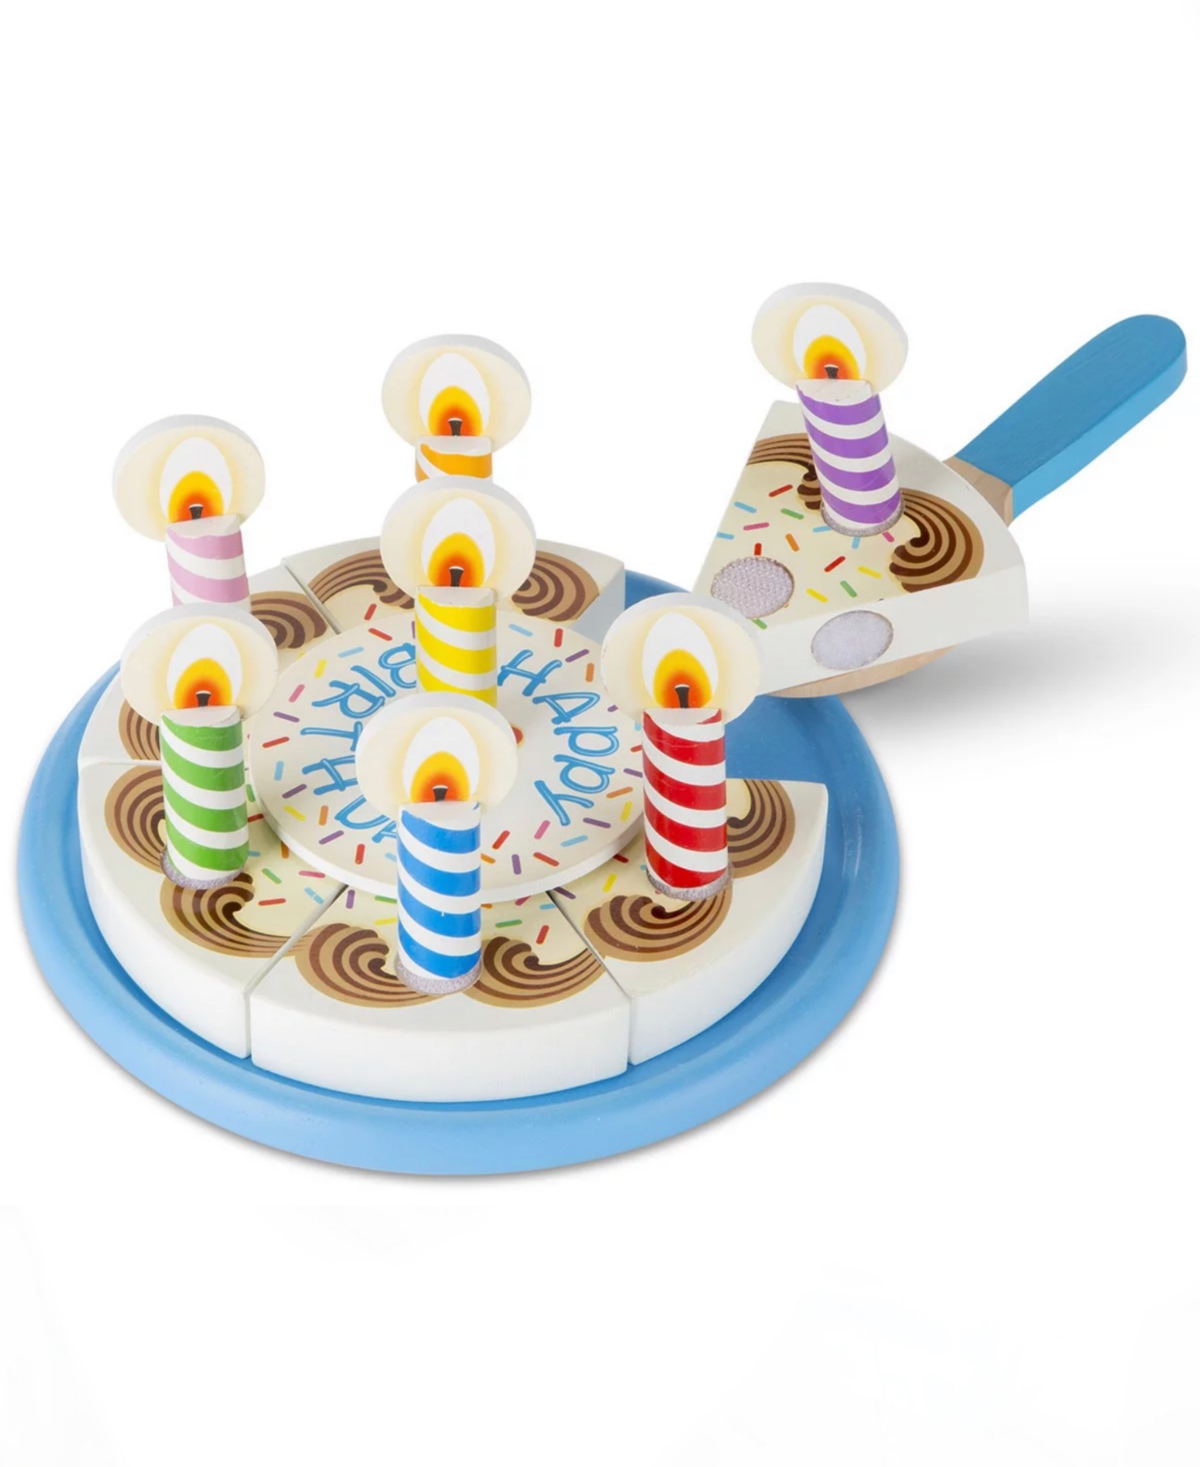 Melissa & Doug Kids' Birthday Party Wooden Cake Cutter Playset In Multi Colored